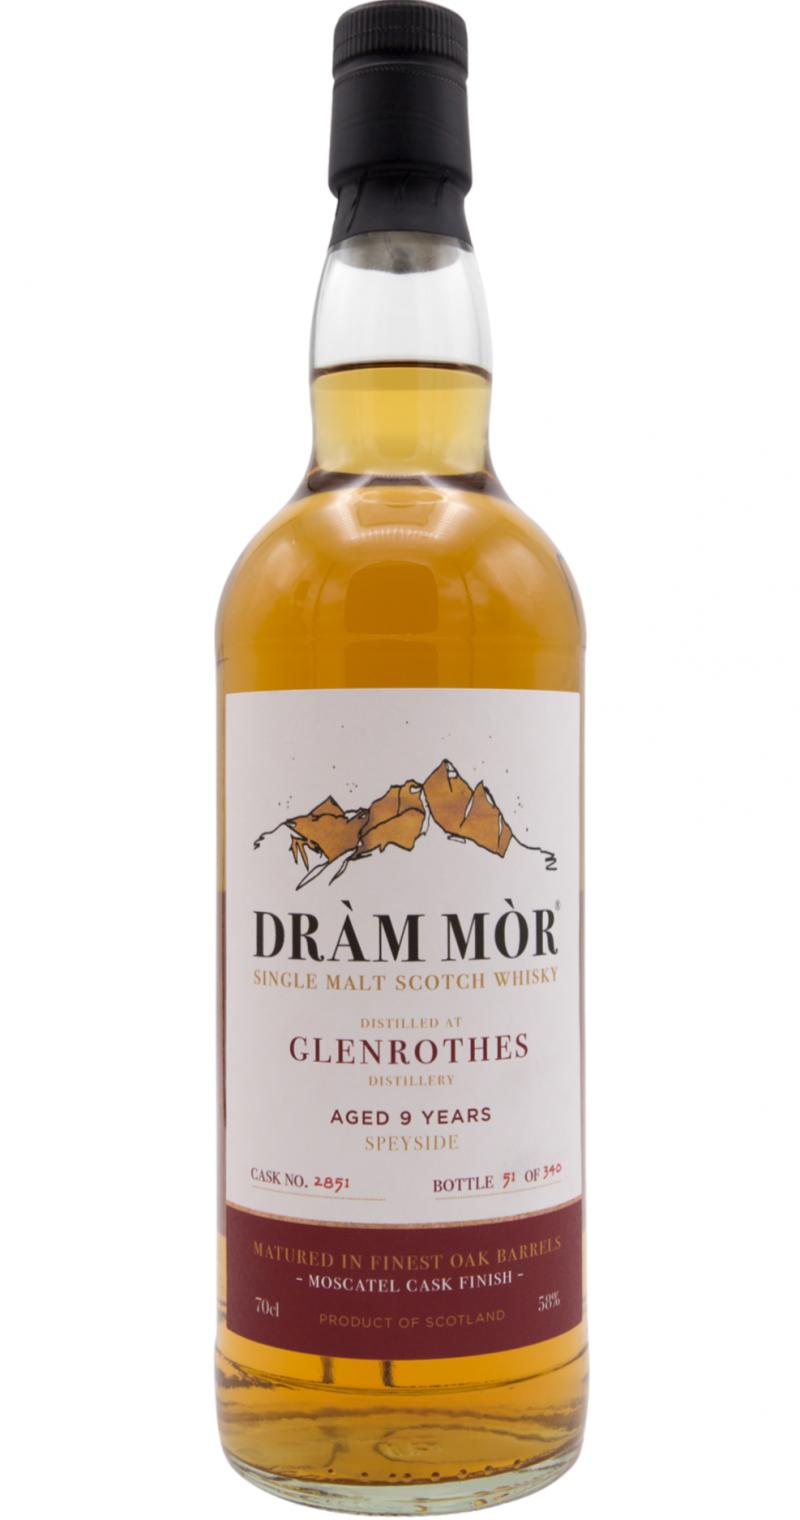 Glenrothes 09-year-old DMor